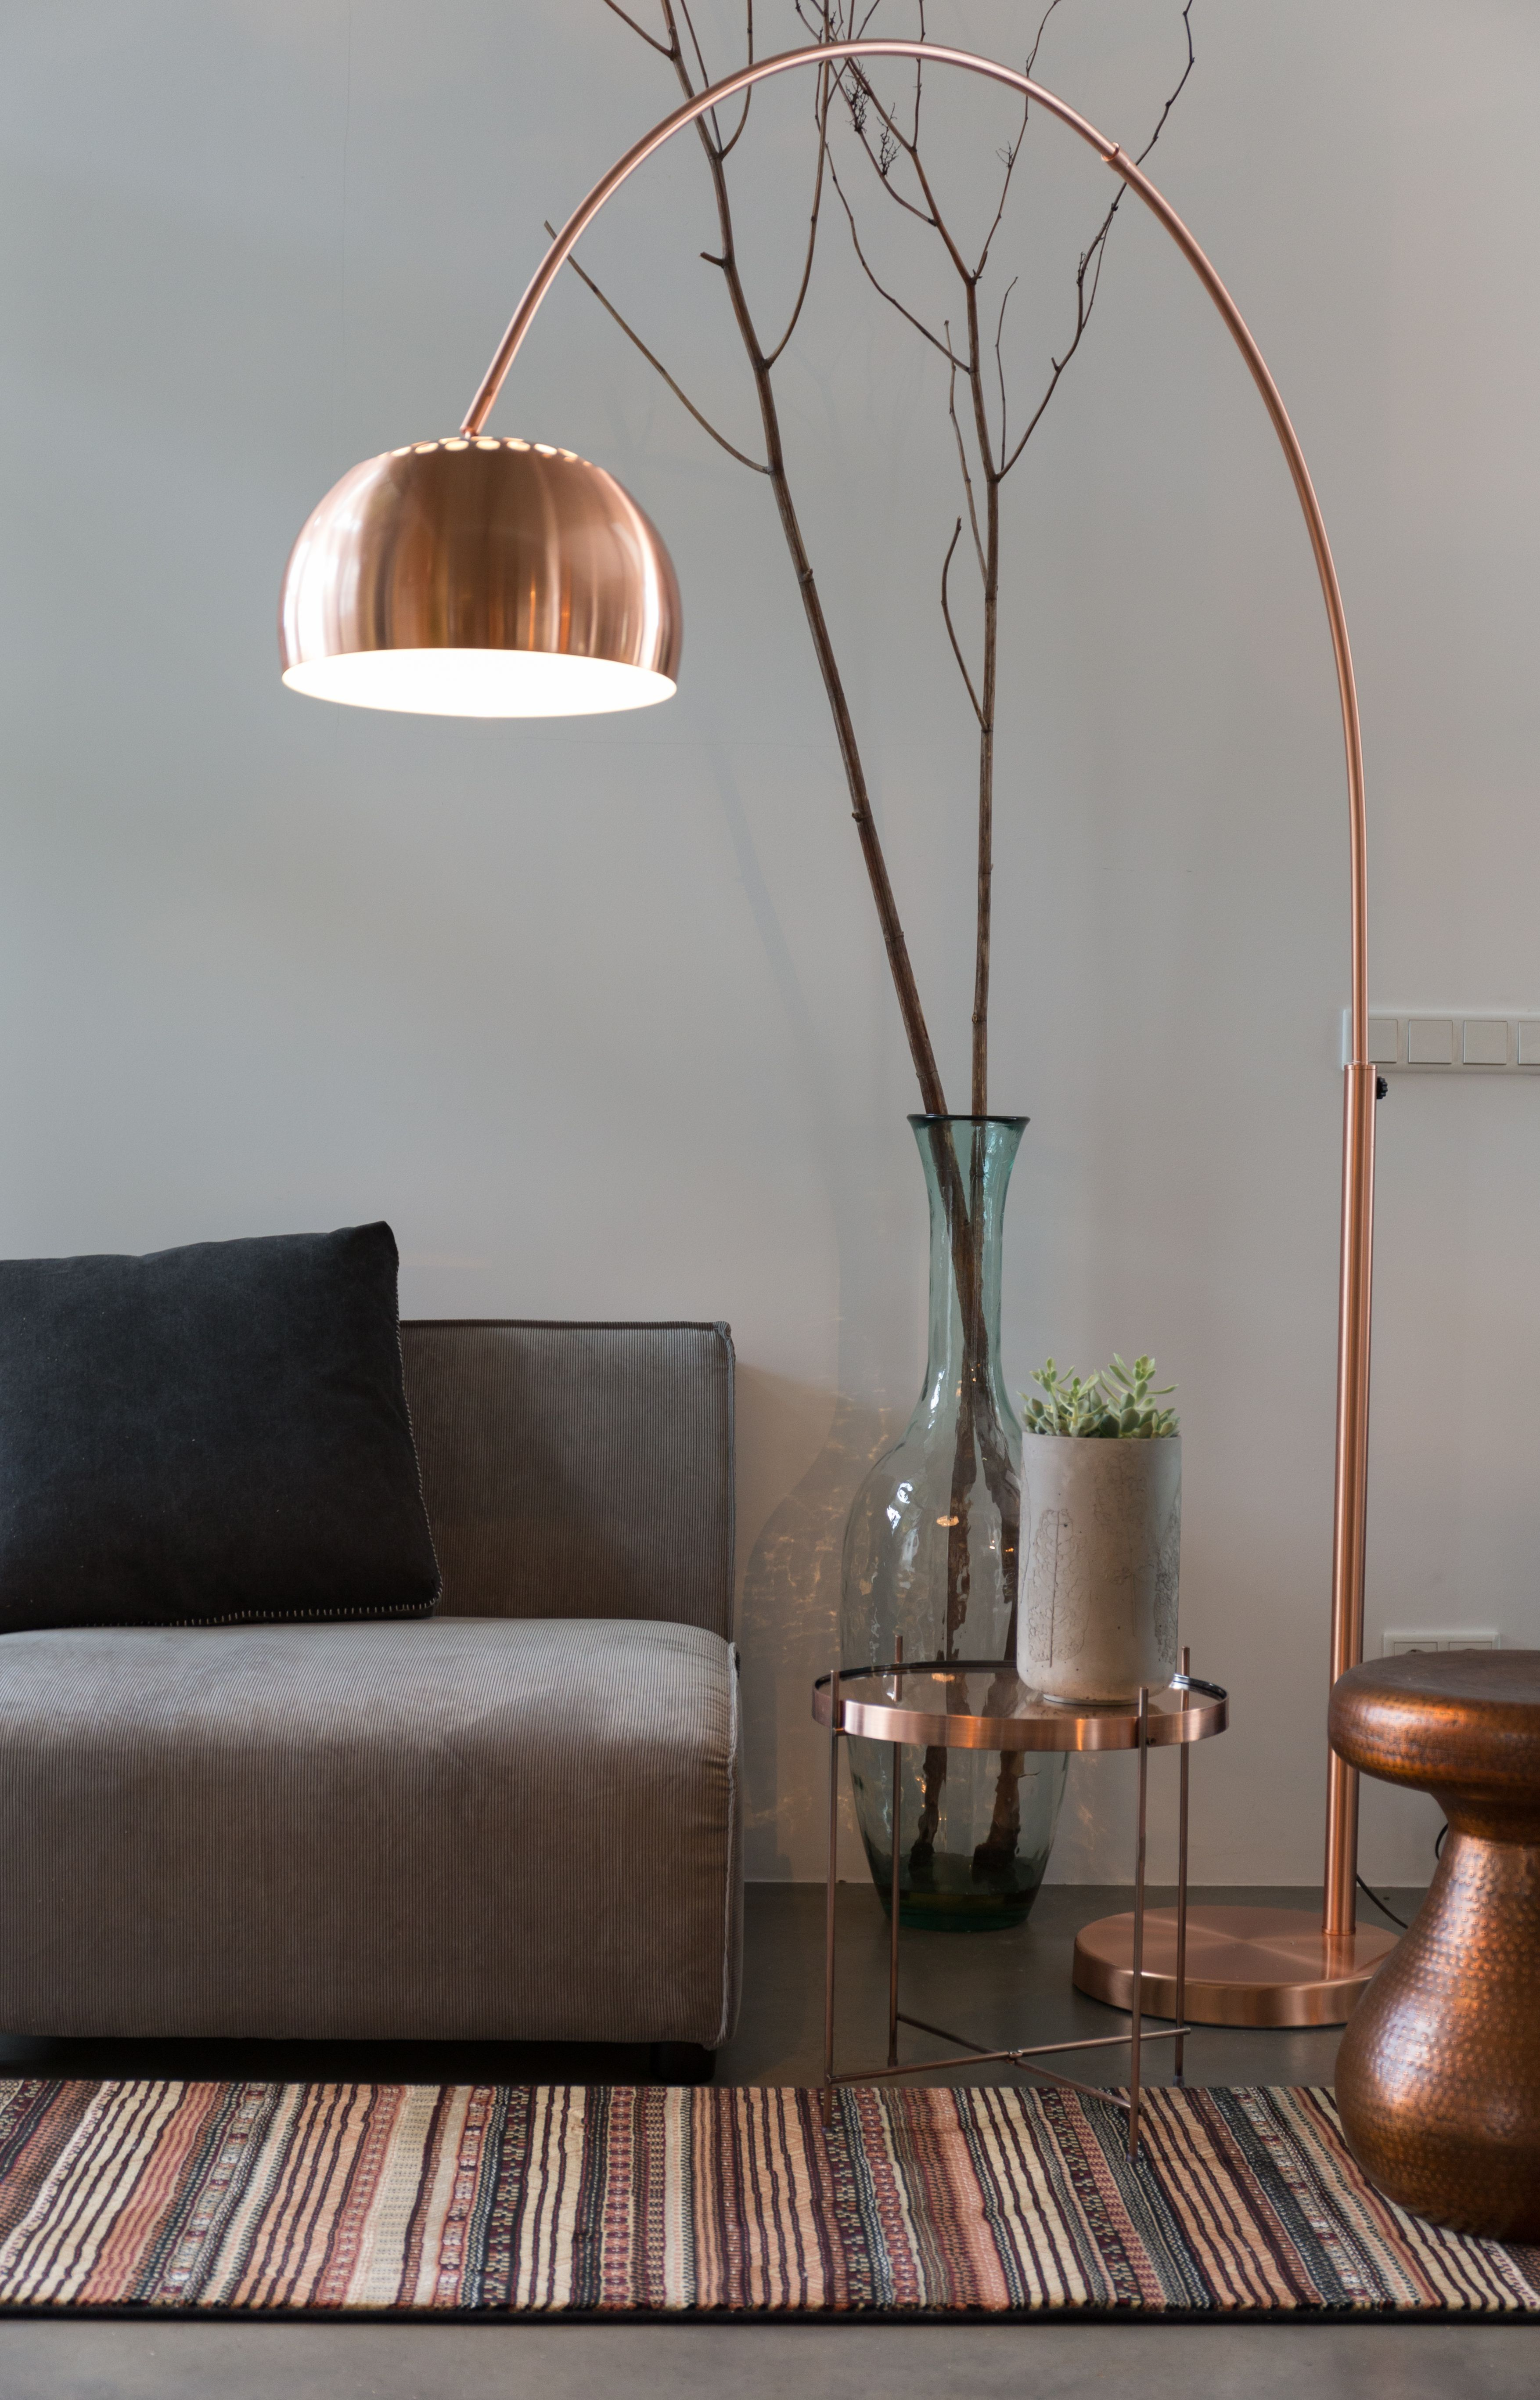 23 Ways To Decorate With Copper Modern Floor Lamps Arc pertaining to size 3508 X 5466